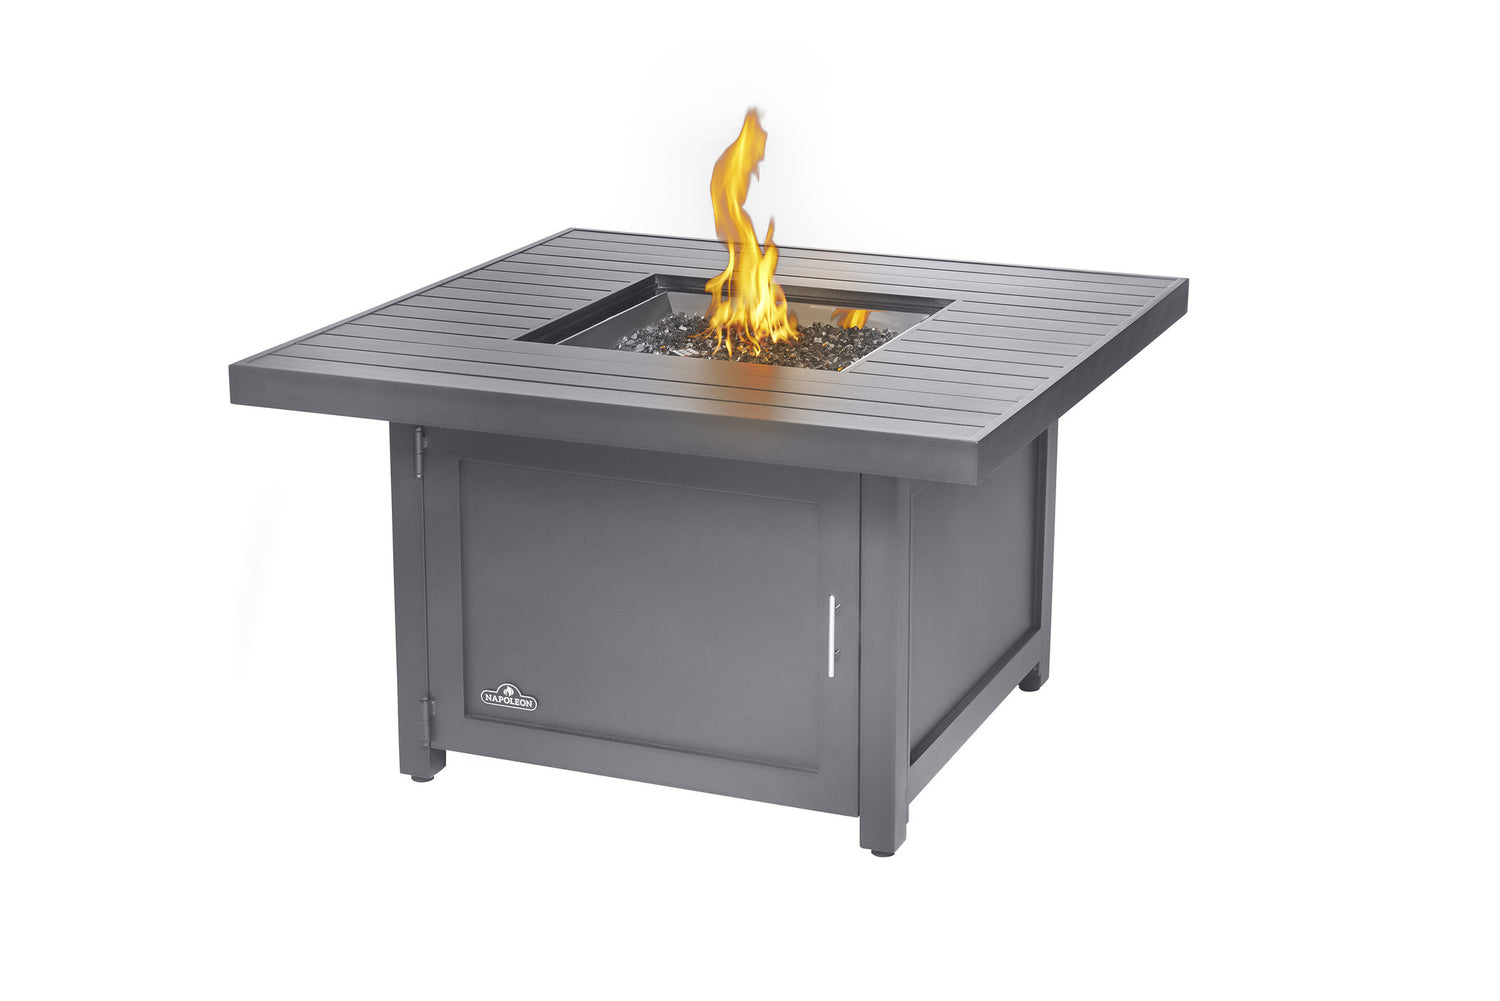 Napoleon Hampton Patio Flame Square Fire Table - Propane - Available in-store and online with Barbecues Galore. Shop for all your BBQ, patio, accessory and fire table needs. Located in Burlington, Oakville & Etobicoke, Ontario, as well as two locations in Calgary, Alberta.